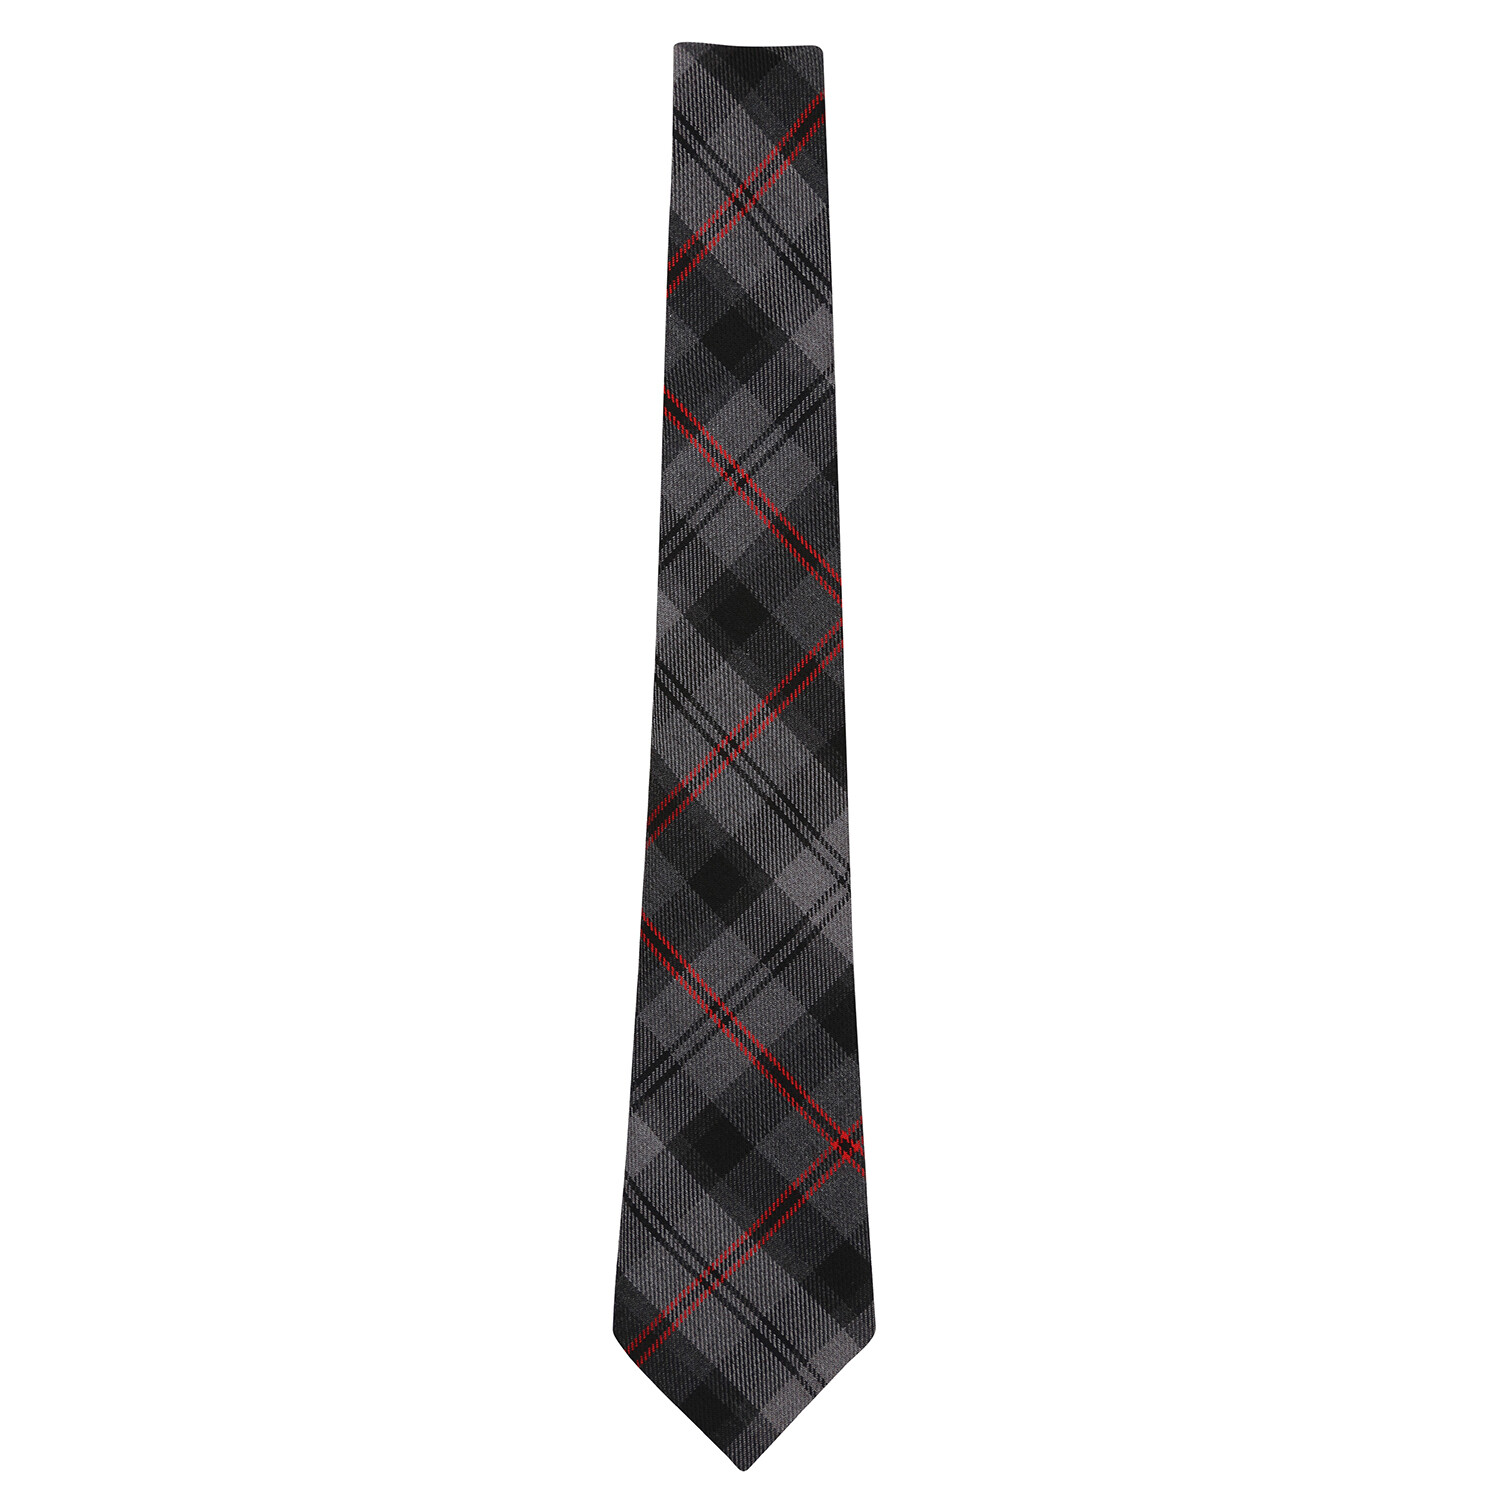 Whinhill Primary School tie